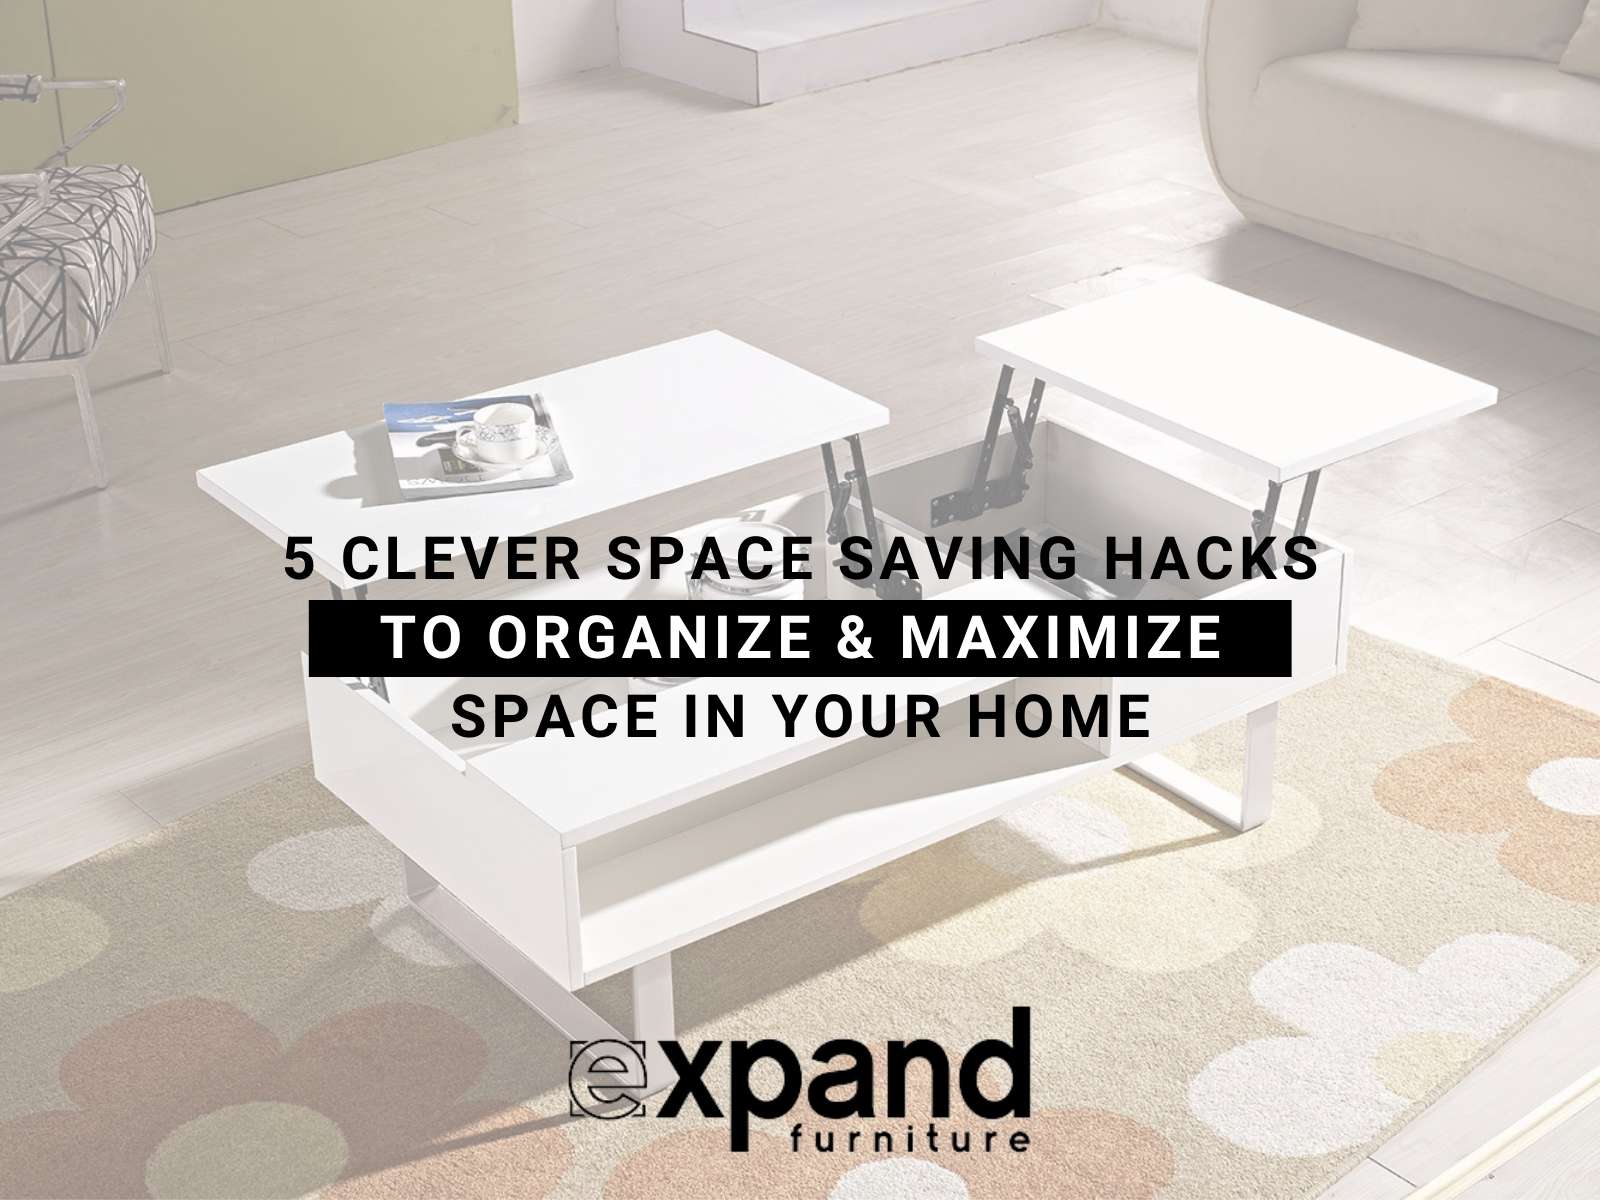 5 Clever Space Saving Hacks To Organize & Maximize Space In Your Home